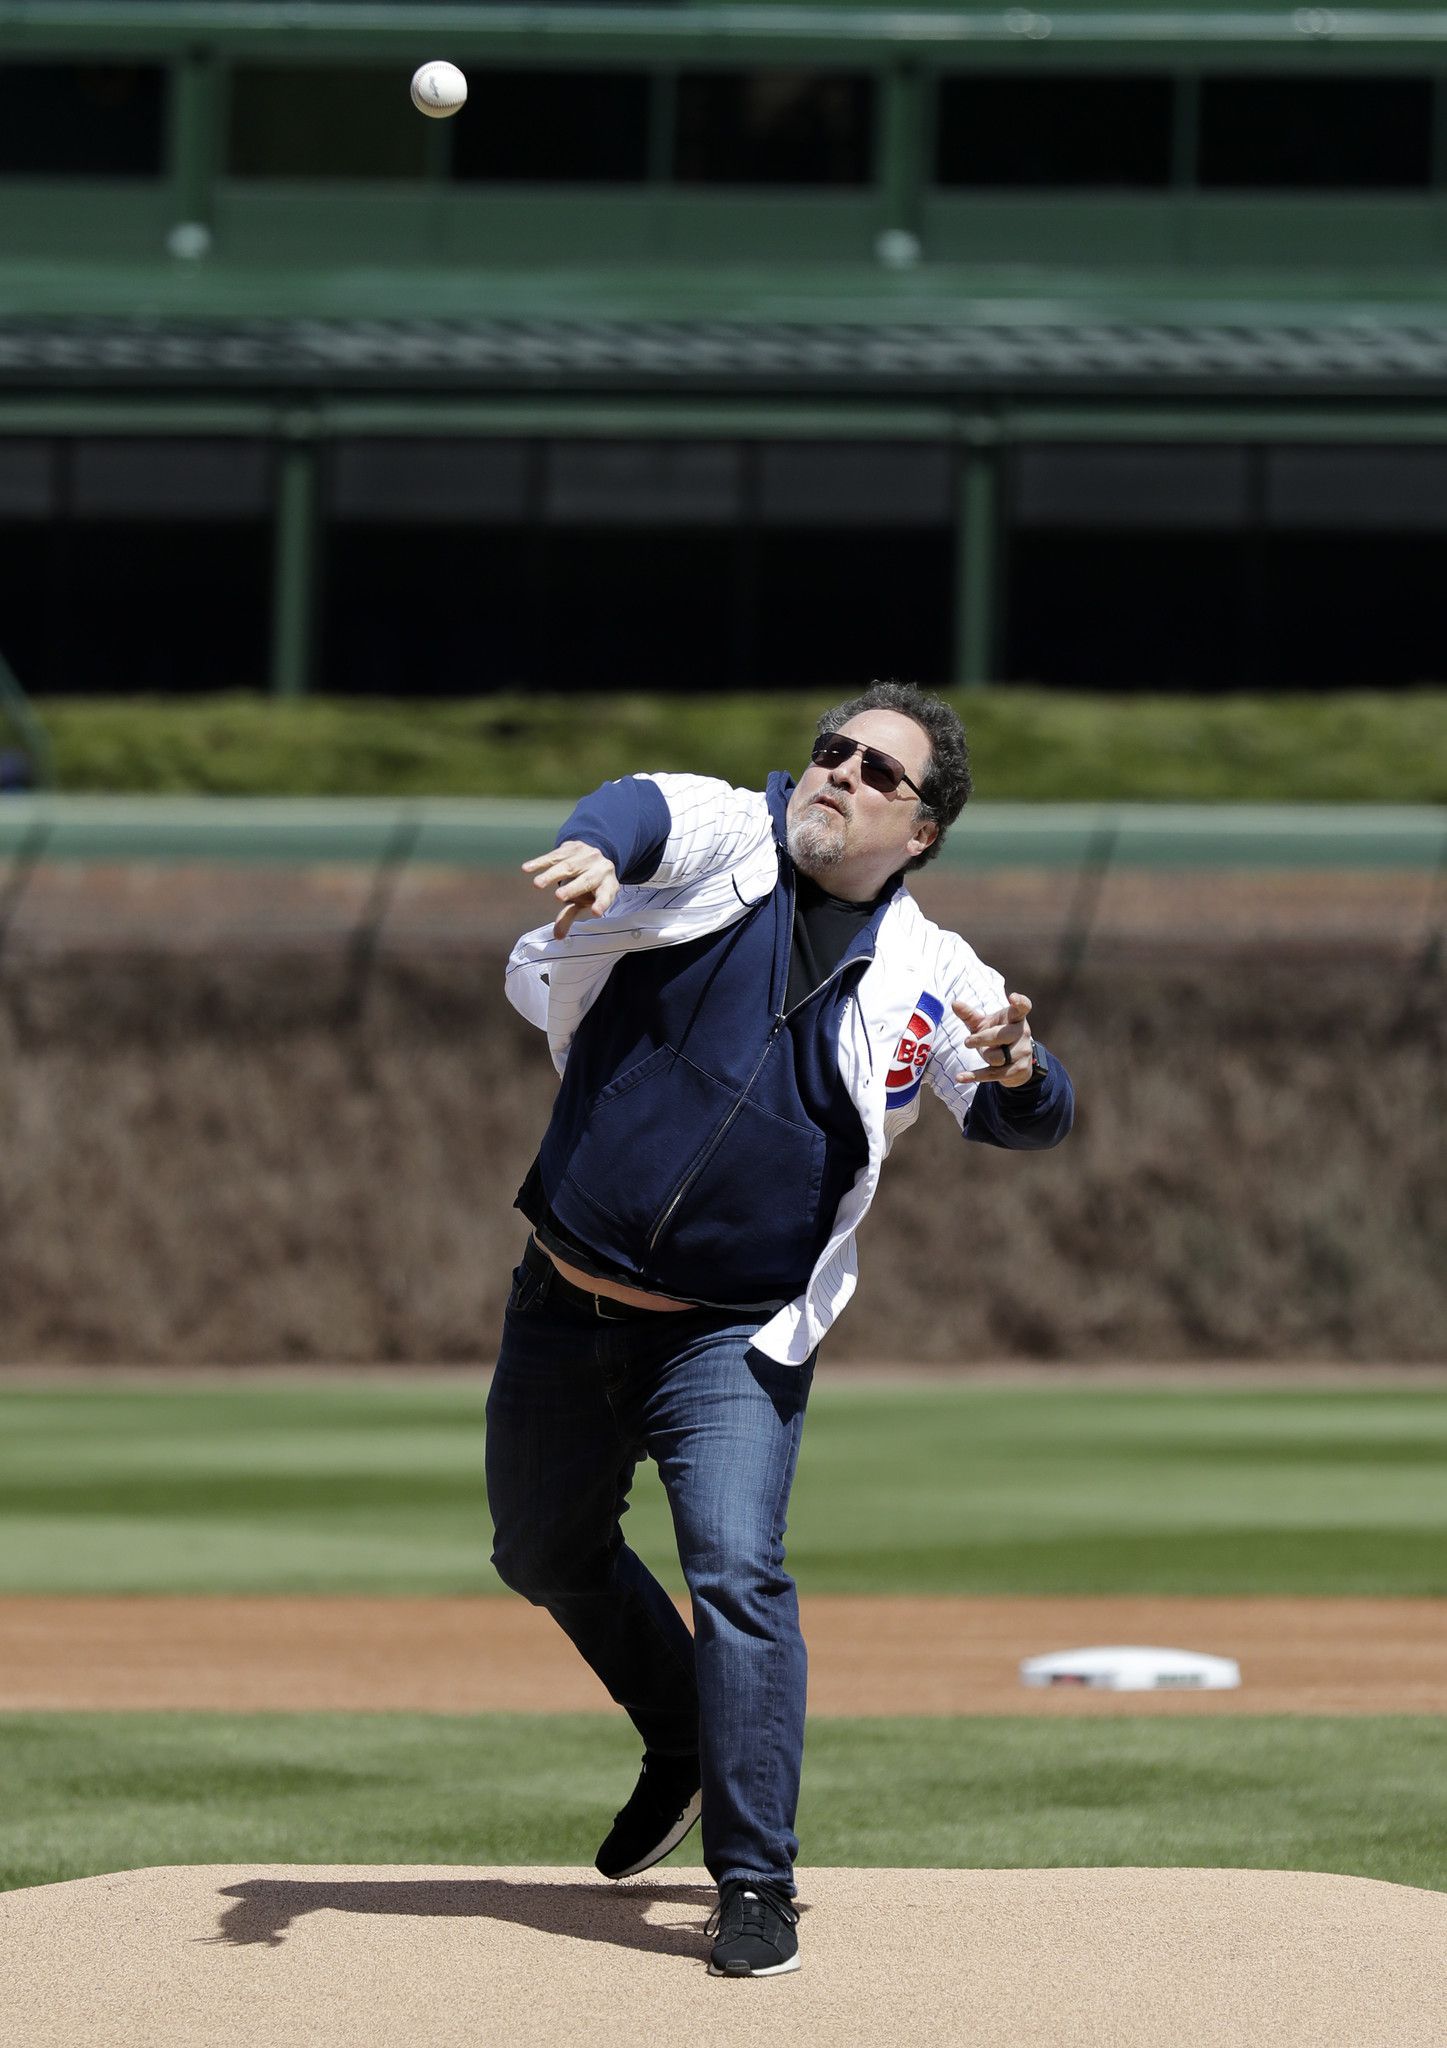 Charlie Sheen would be 'honored' to throw out the first pitch at the World  Series